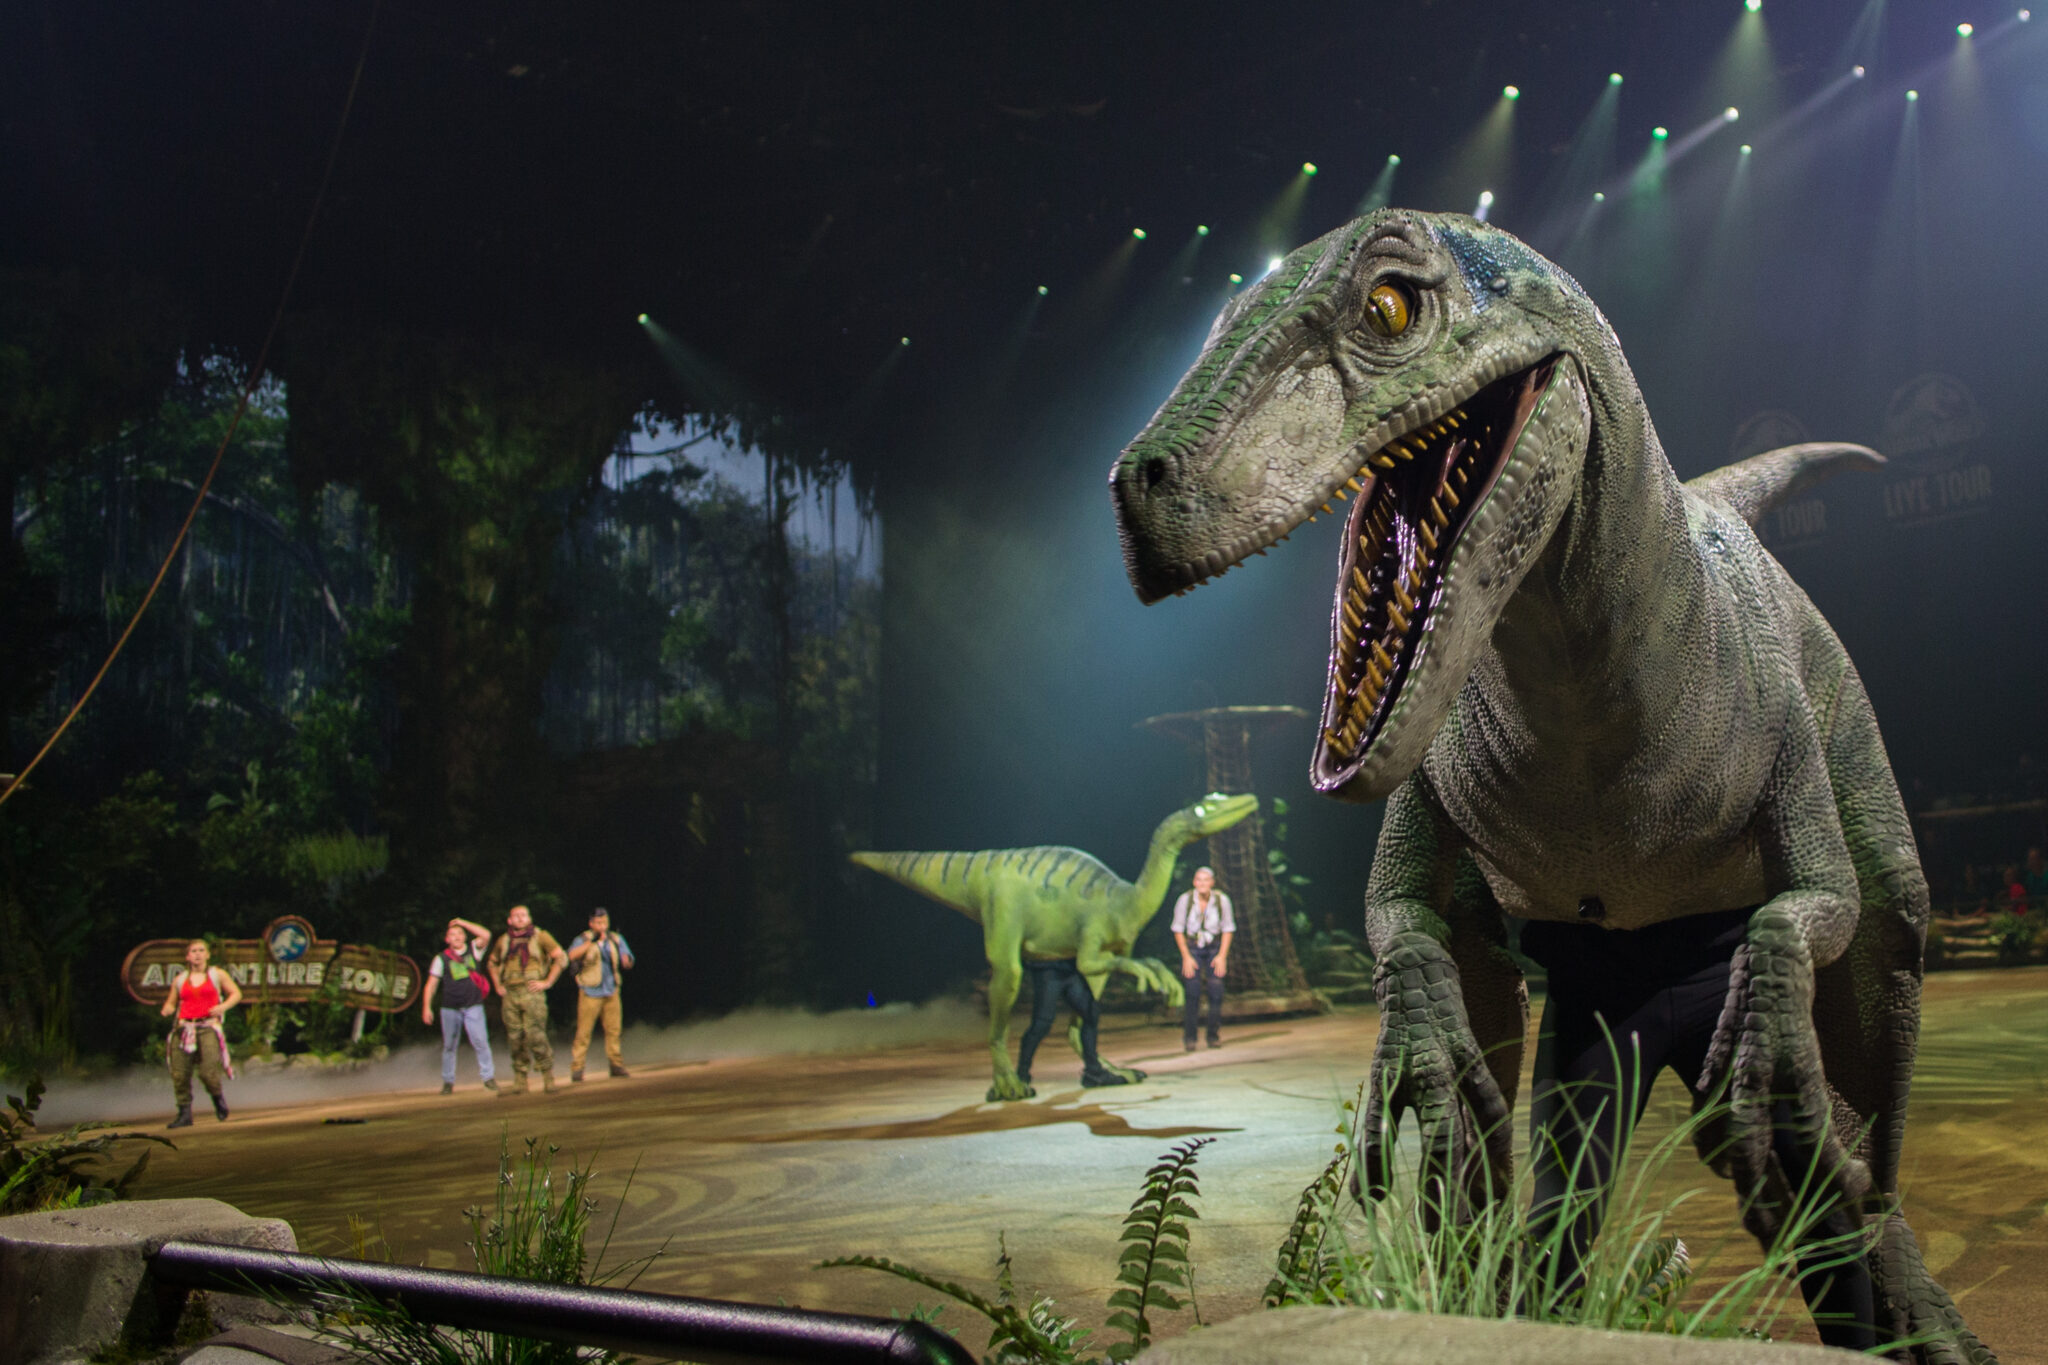 Orlando Jurassic World Live Tour Coming in January *DISCOUNT CODE